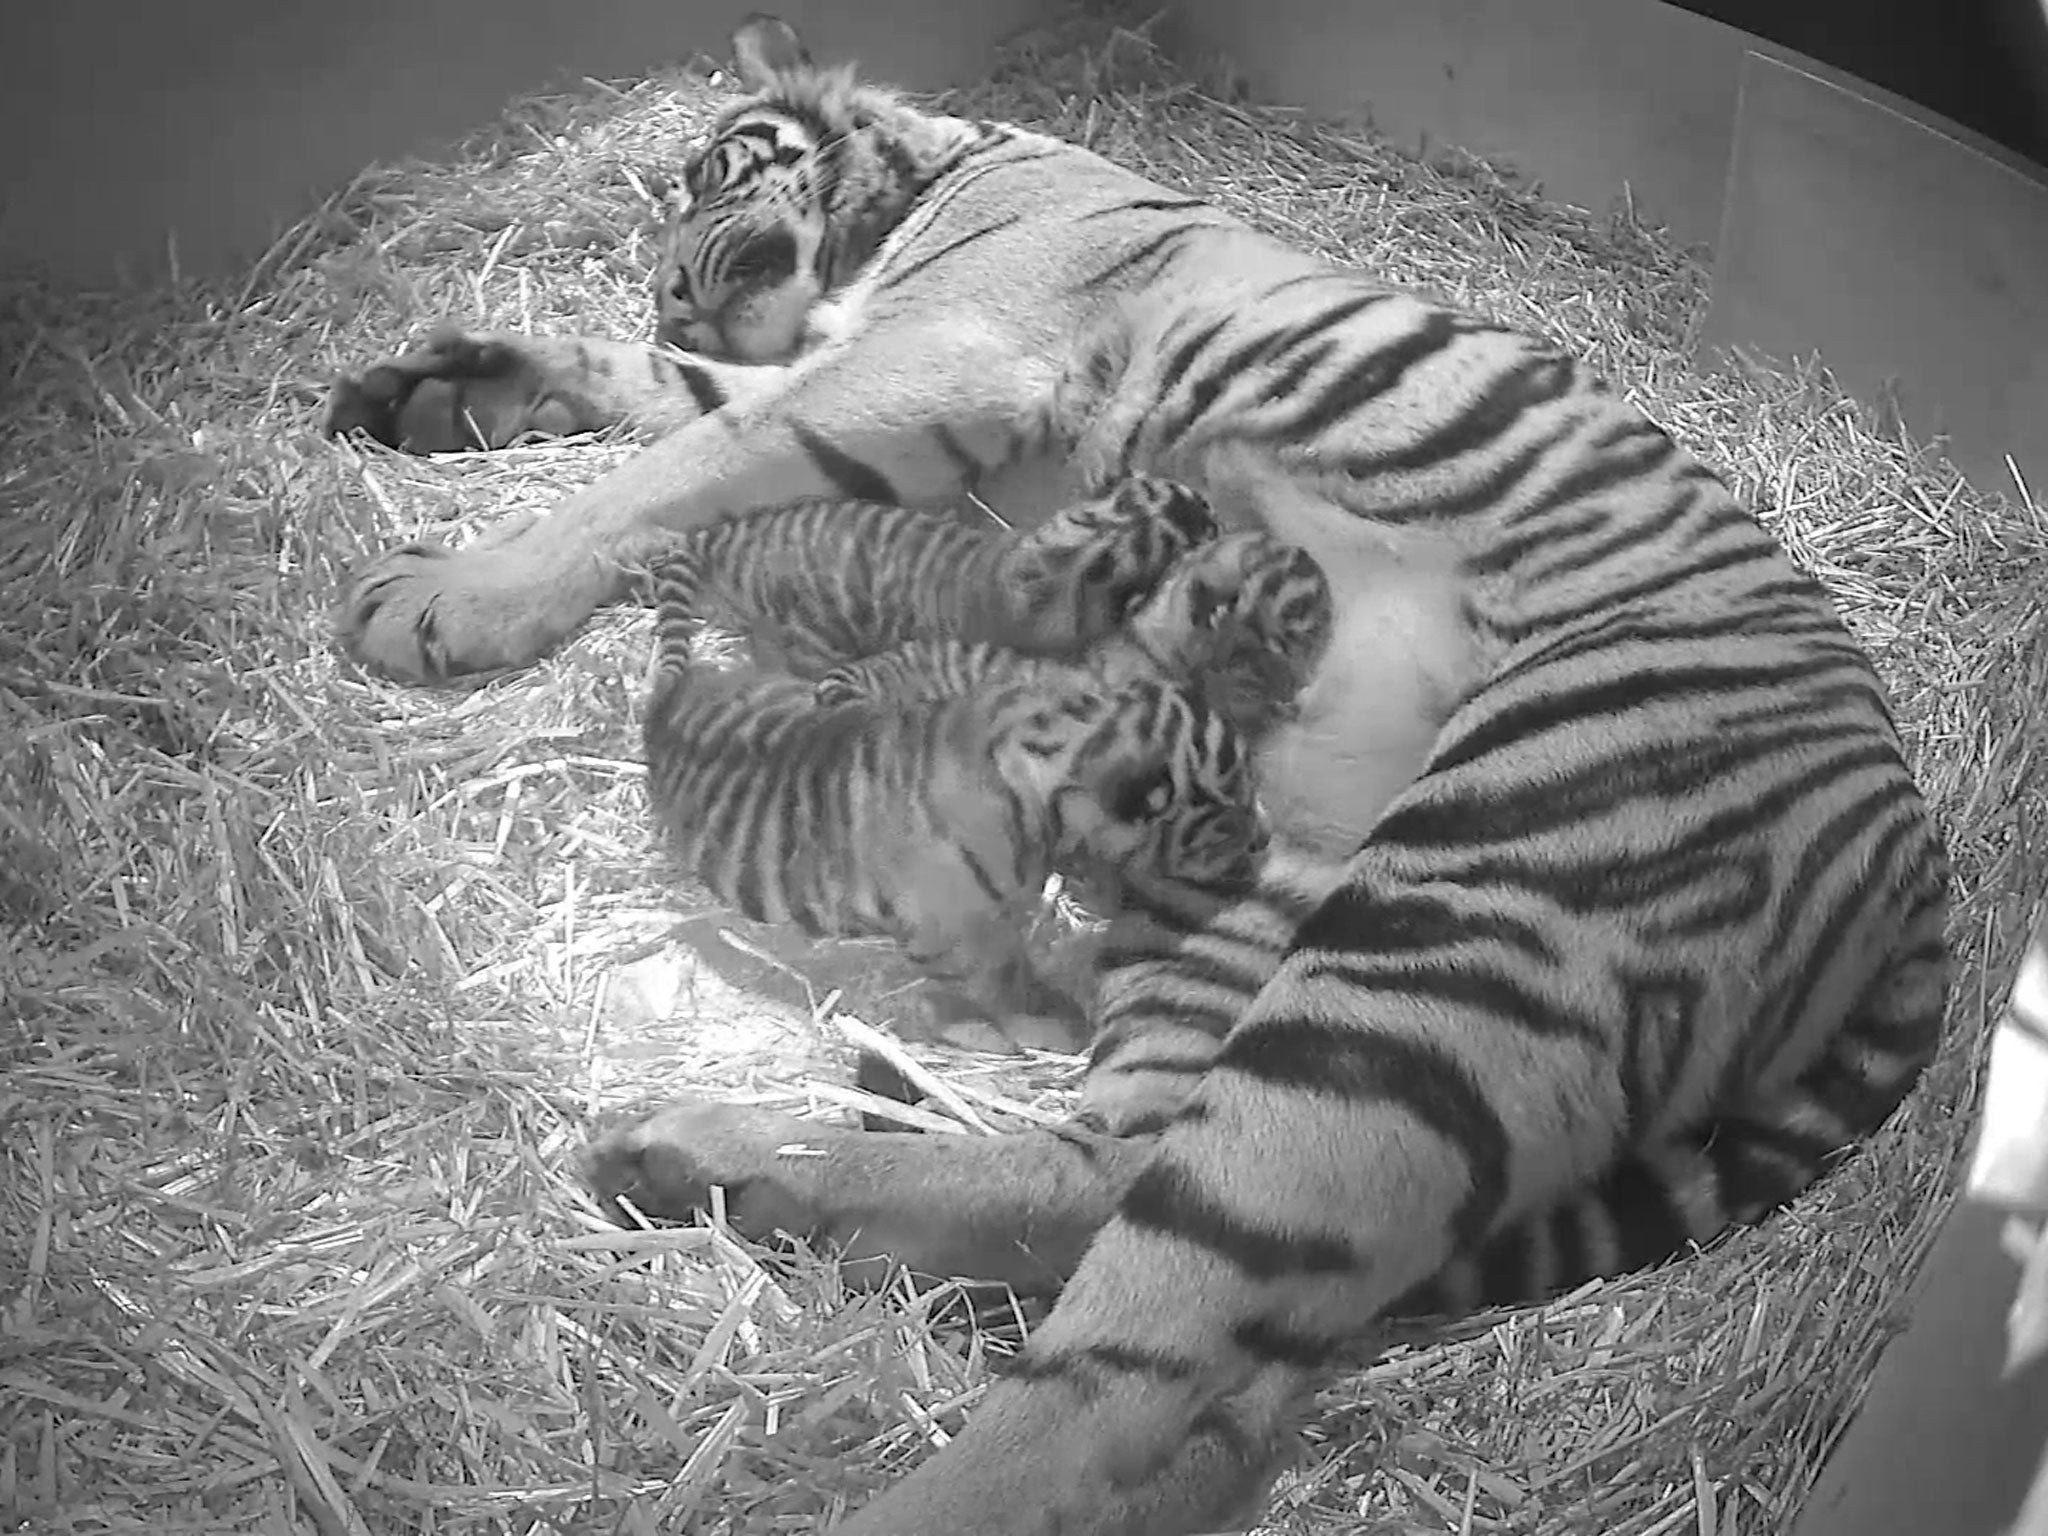 Three of the world’s rarest tigers have been born at ZSL London Zoo, with zookeepers capturing their first moments on hidden cameras when mum Melati feeds her cubs